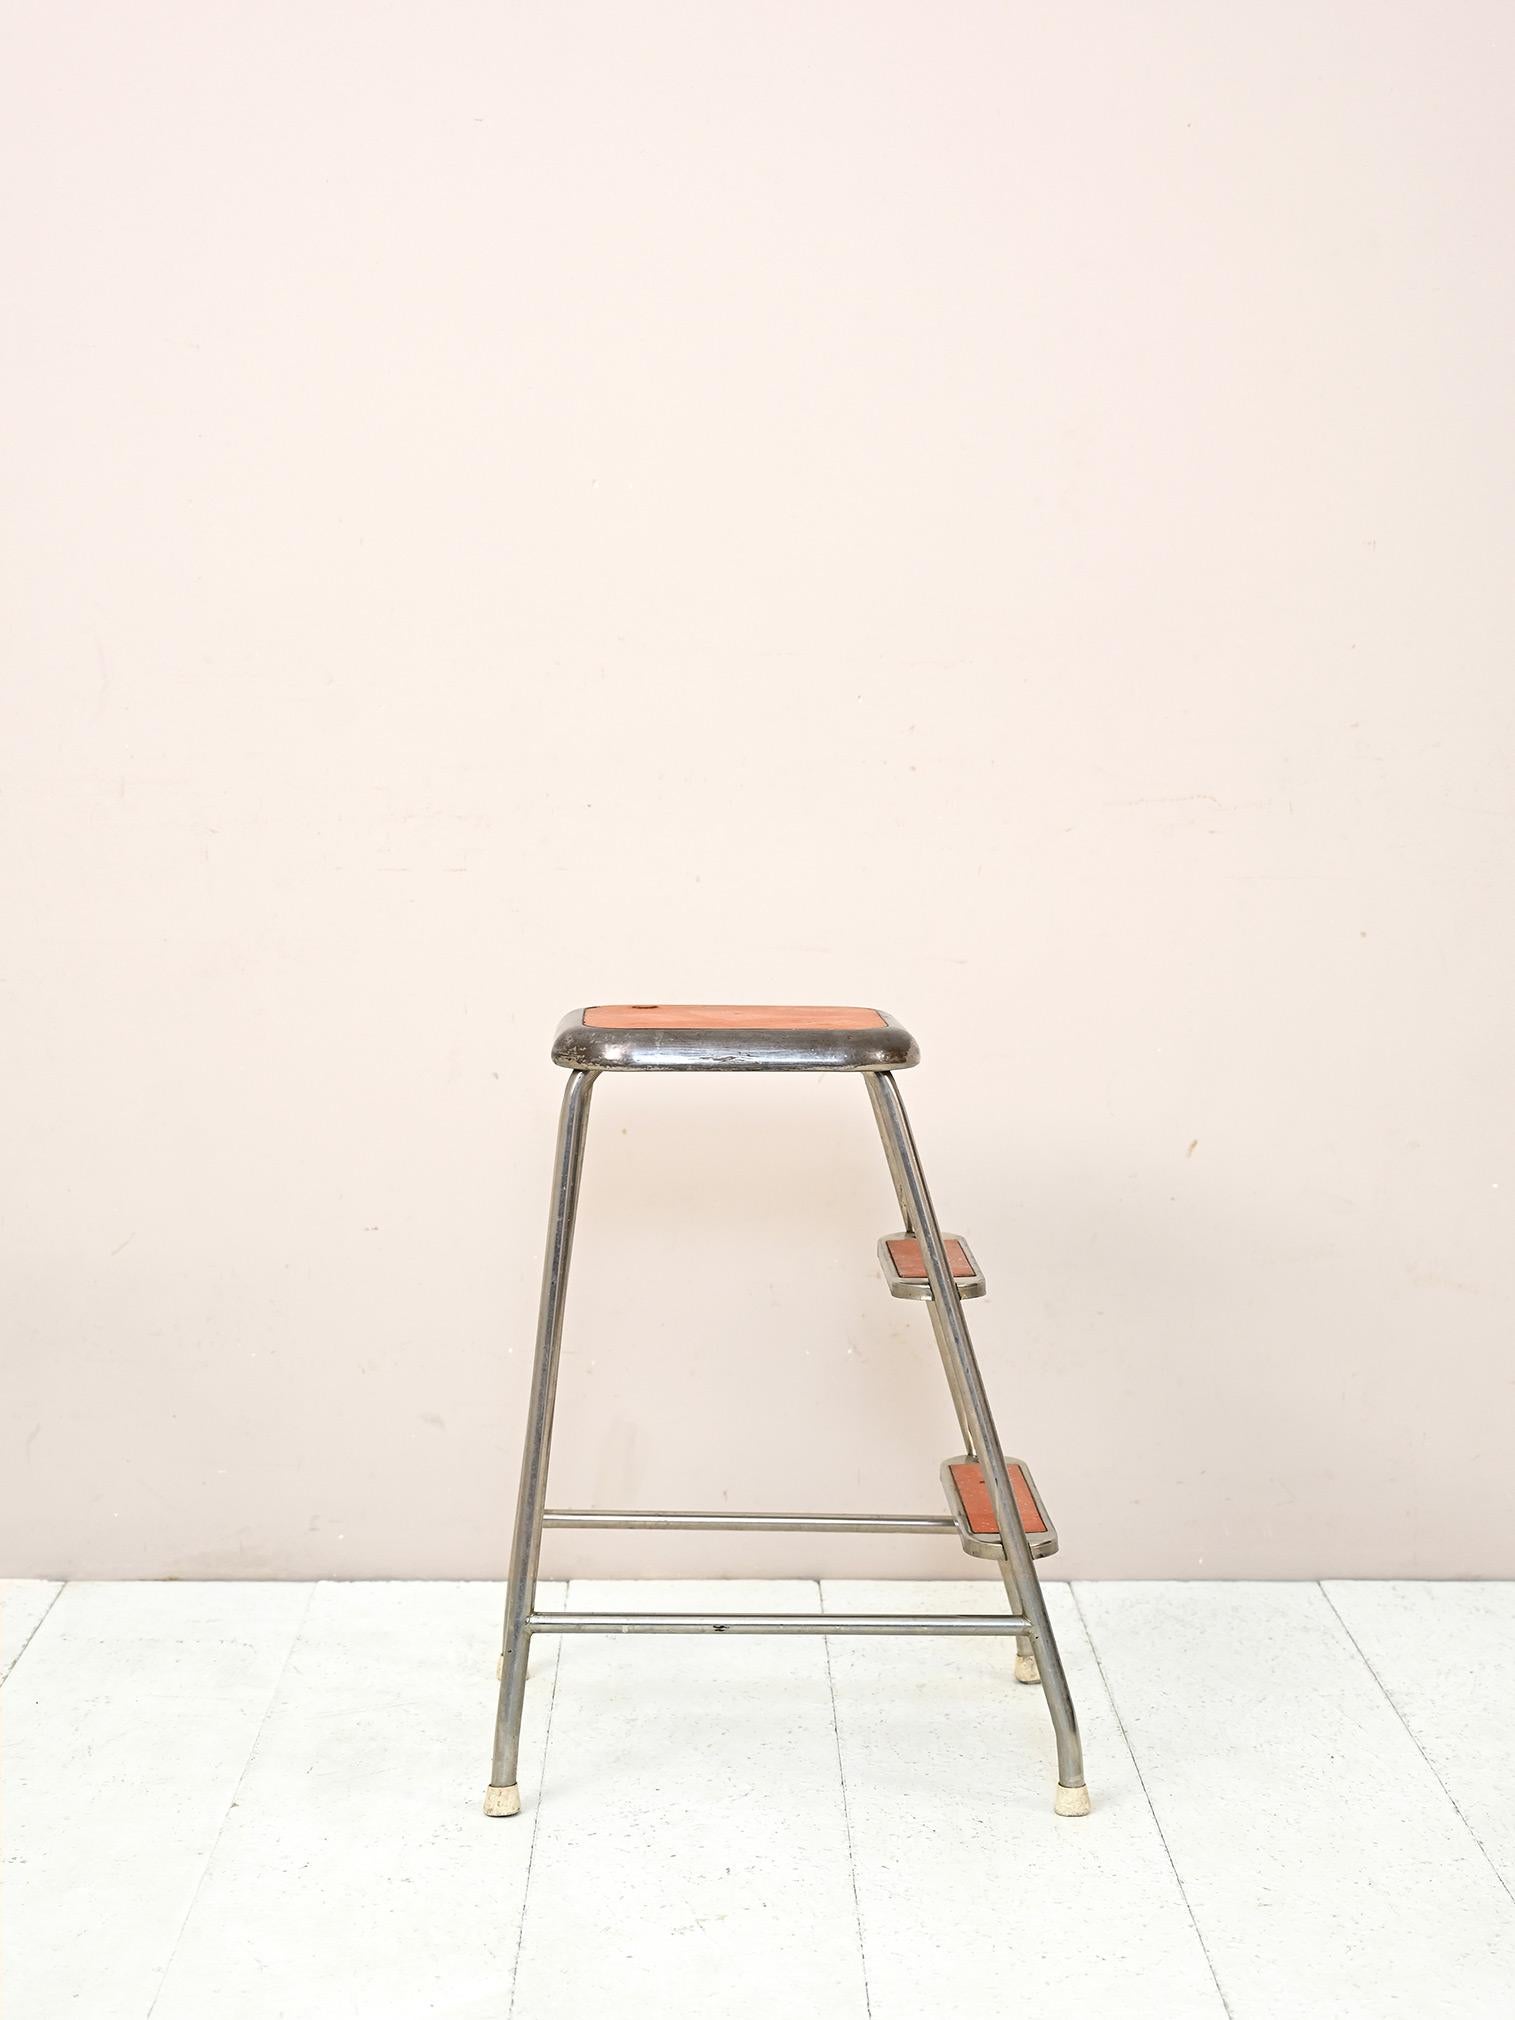 Scandinavian metal ladder.
An original piece found in every home in Sweden. 
Modern and industrial in flavor, it can be used for a variety of purposes, including for resting clothes in the bathroom or as a nightstand in the bedroom.

Good